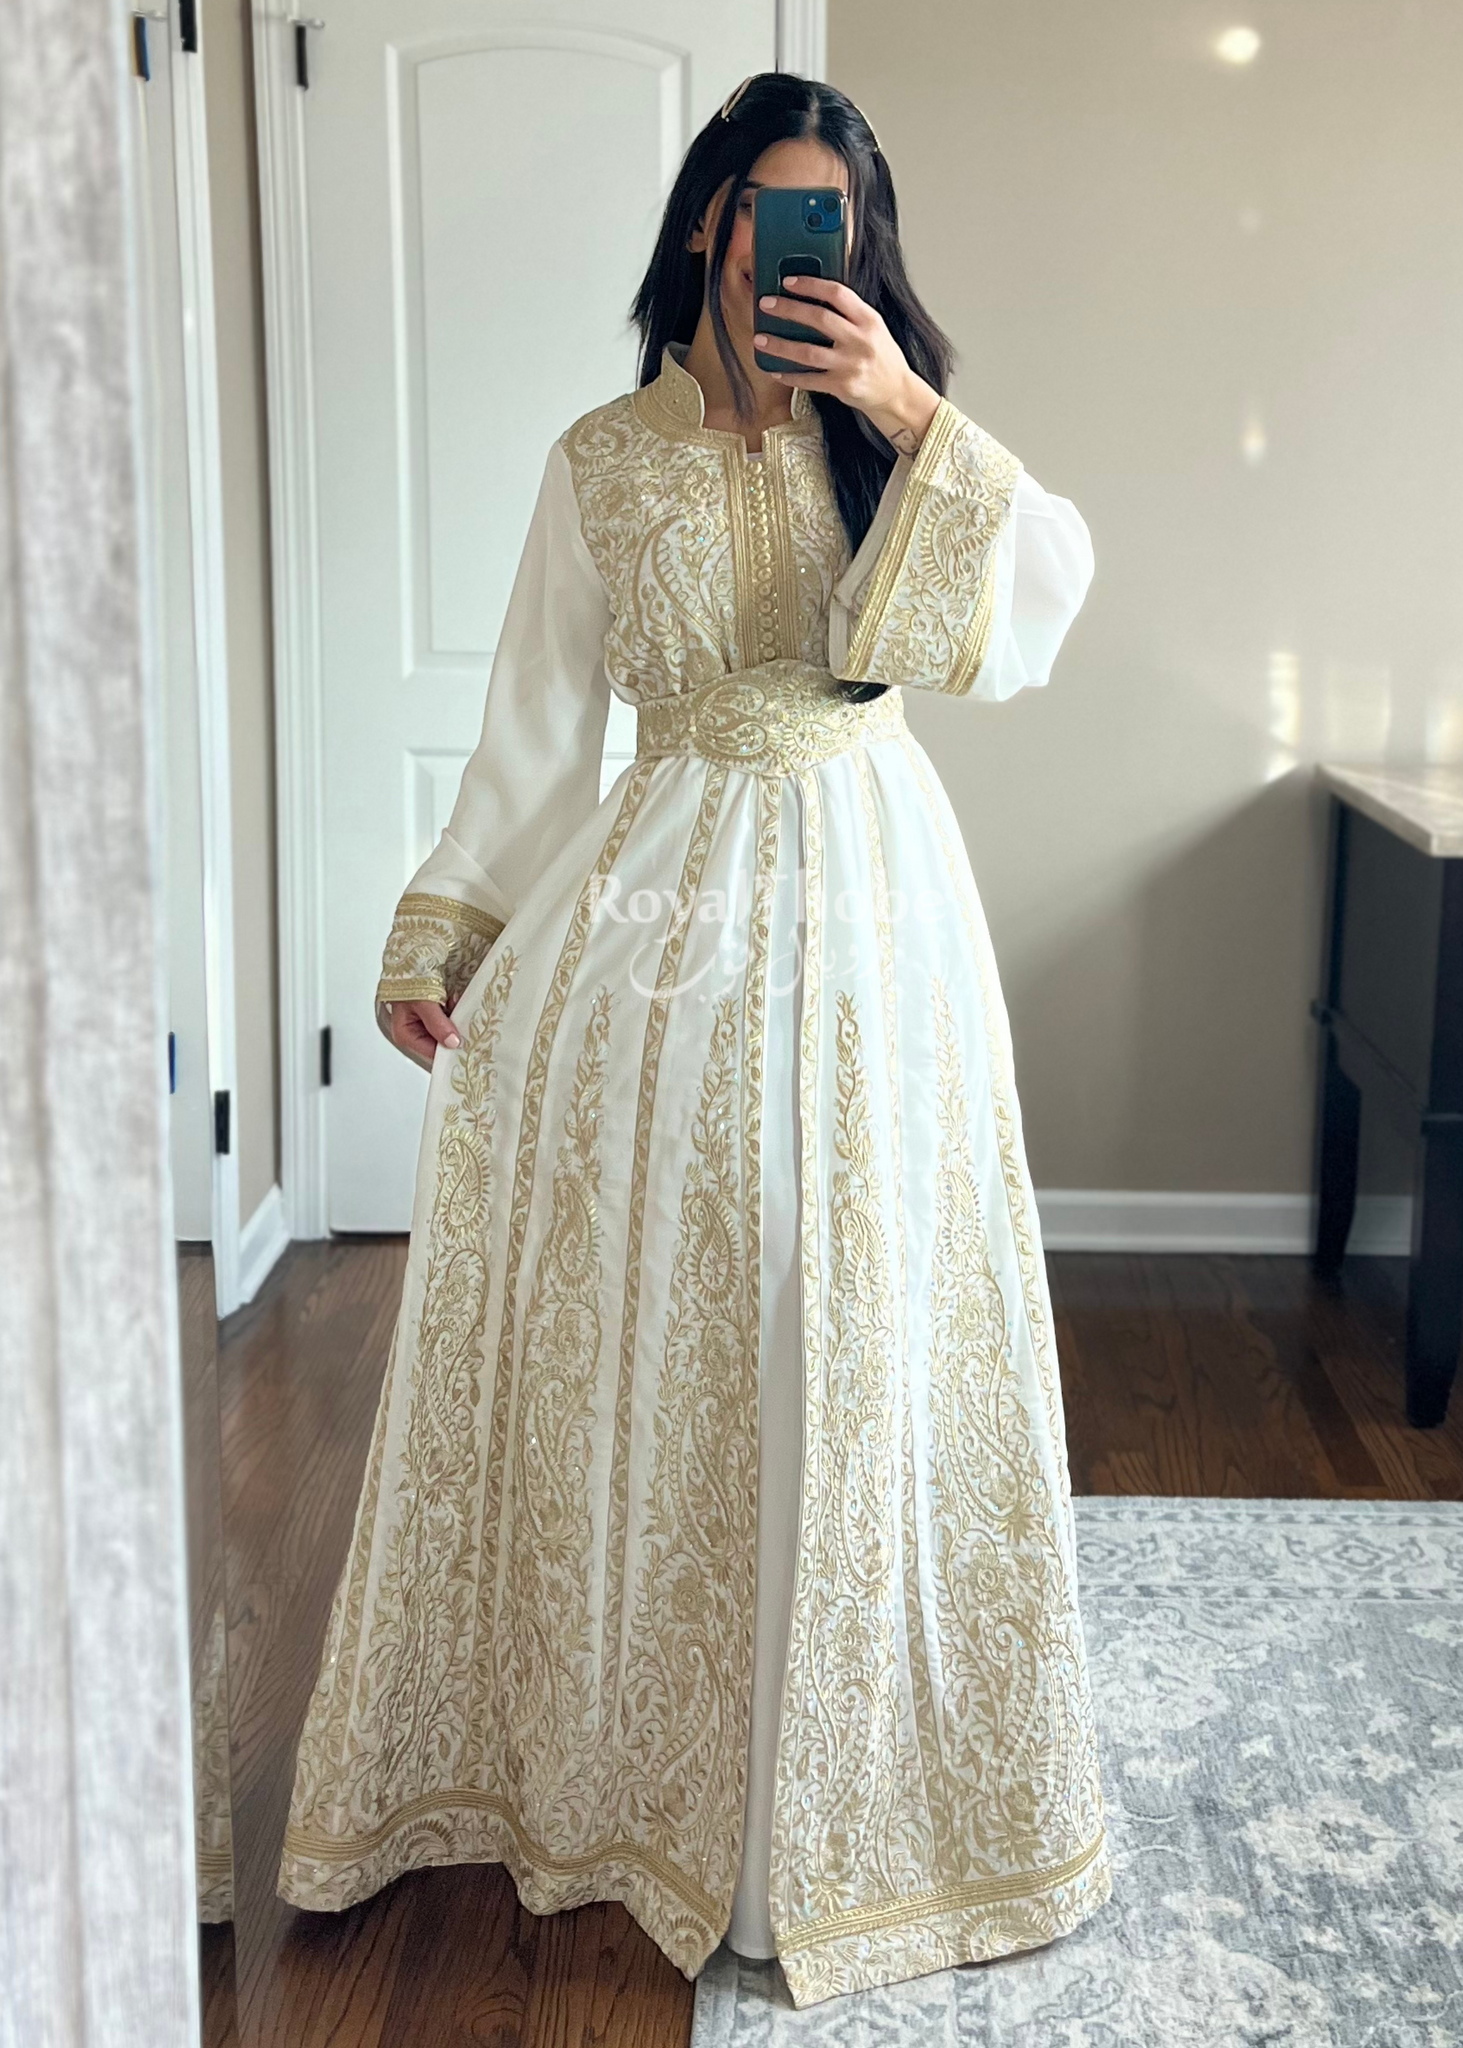 White Wedding Dresses Long Sleeves Gold Lace Appliques Bridal Gowns Chapel  Train | eBay